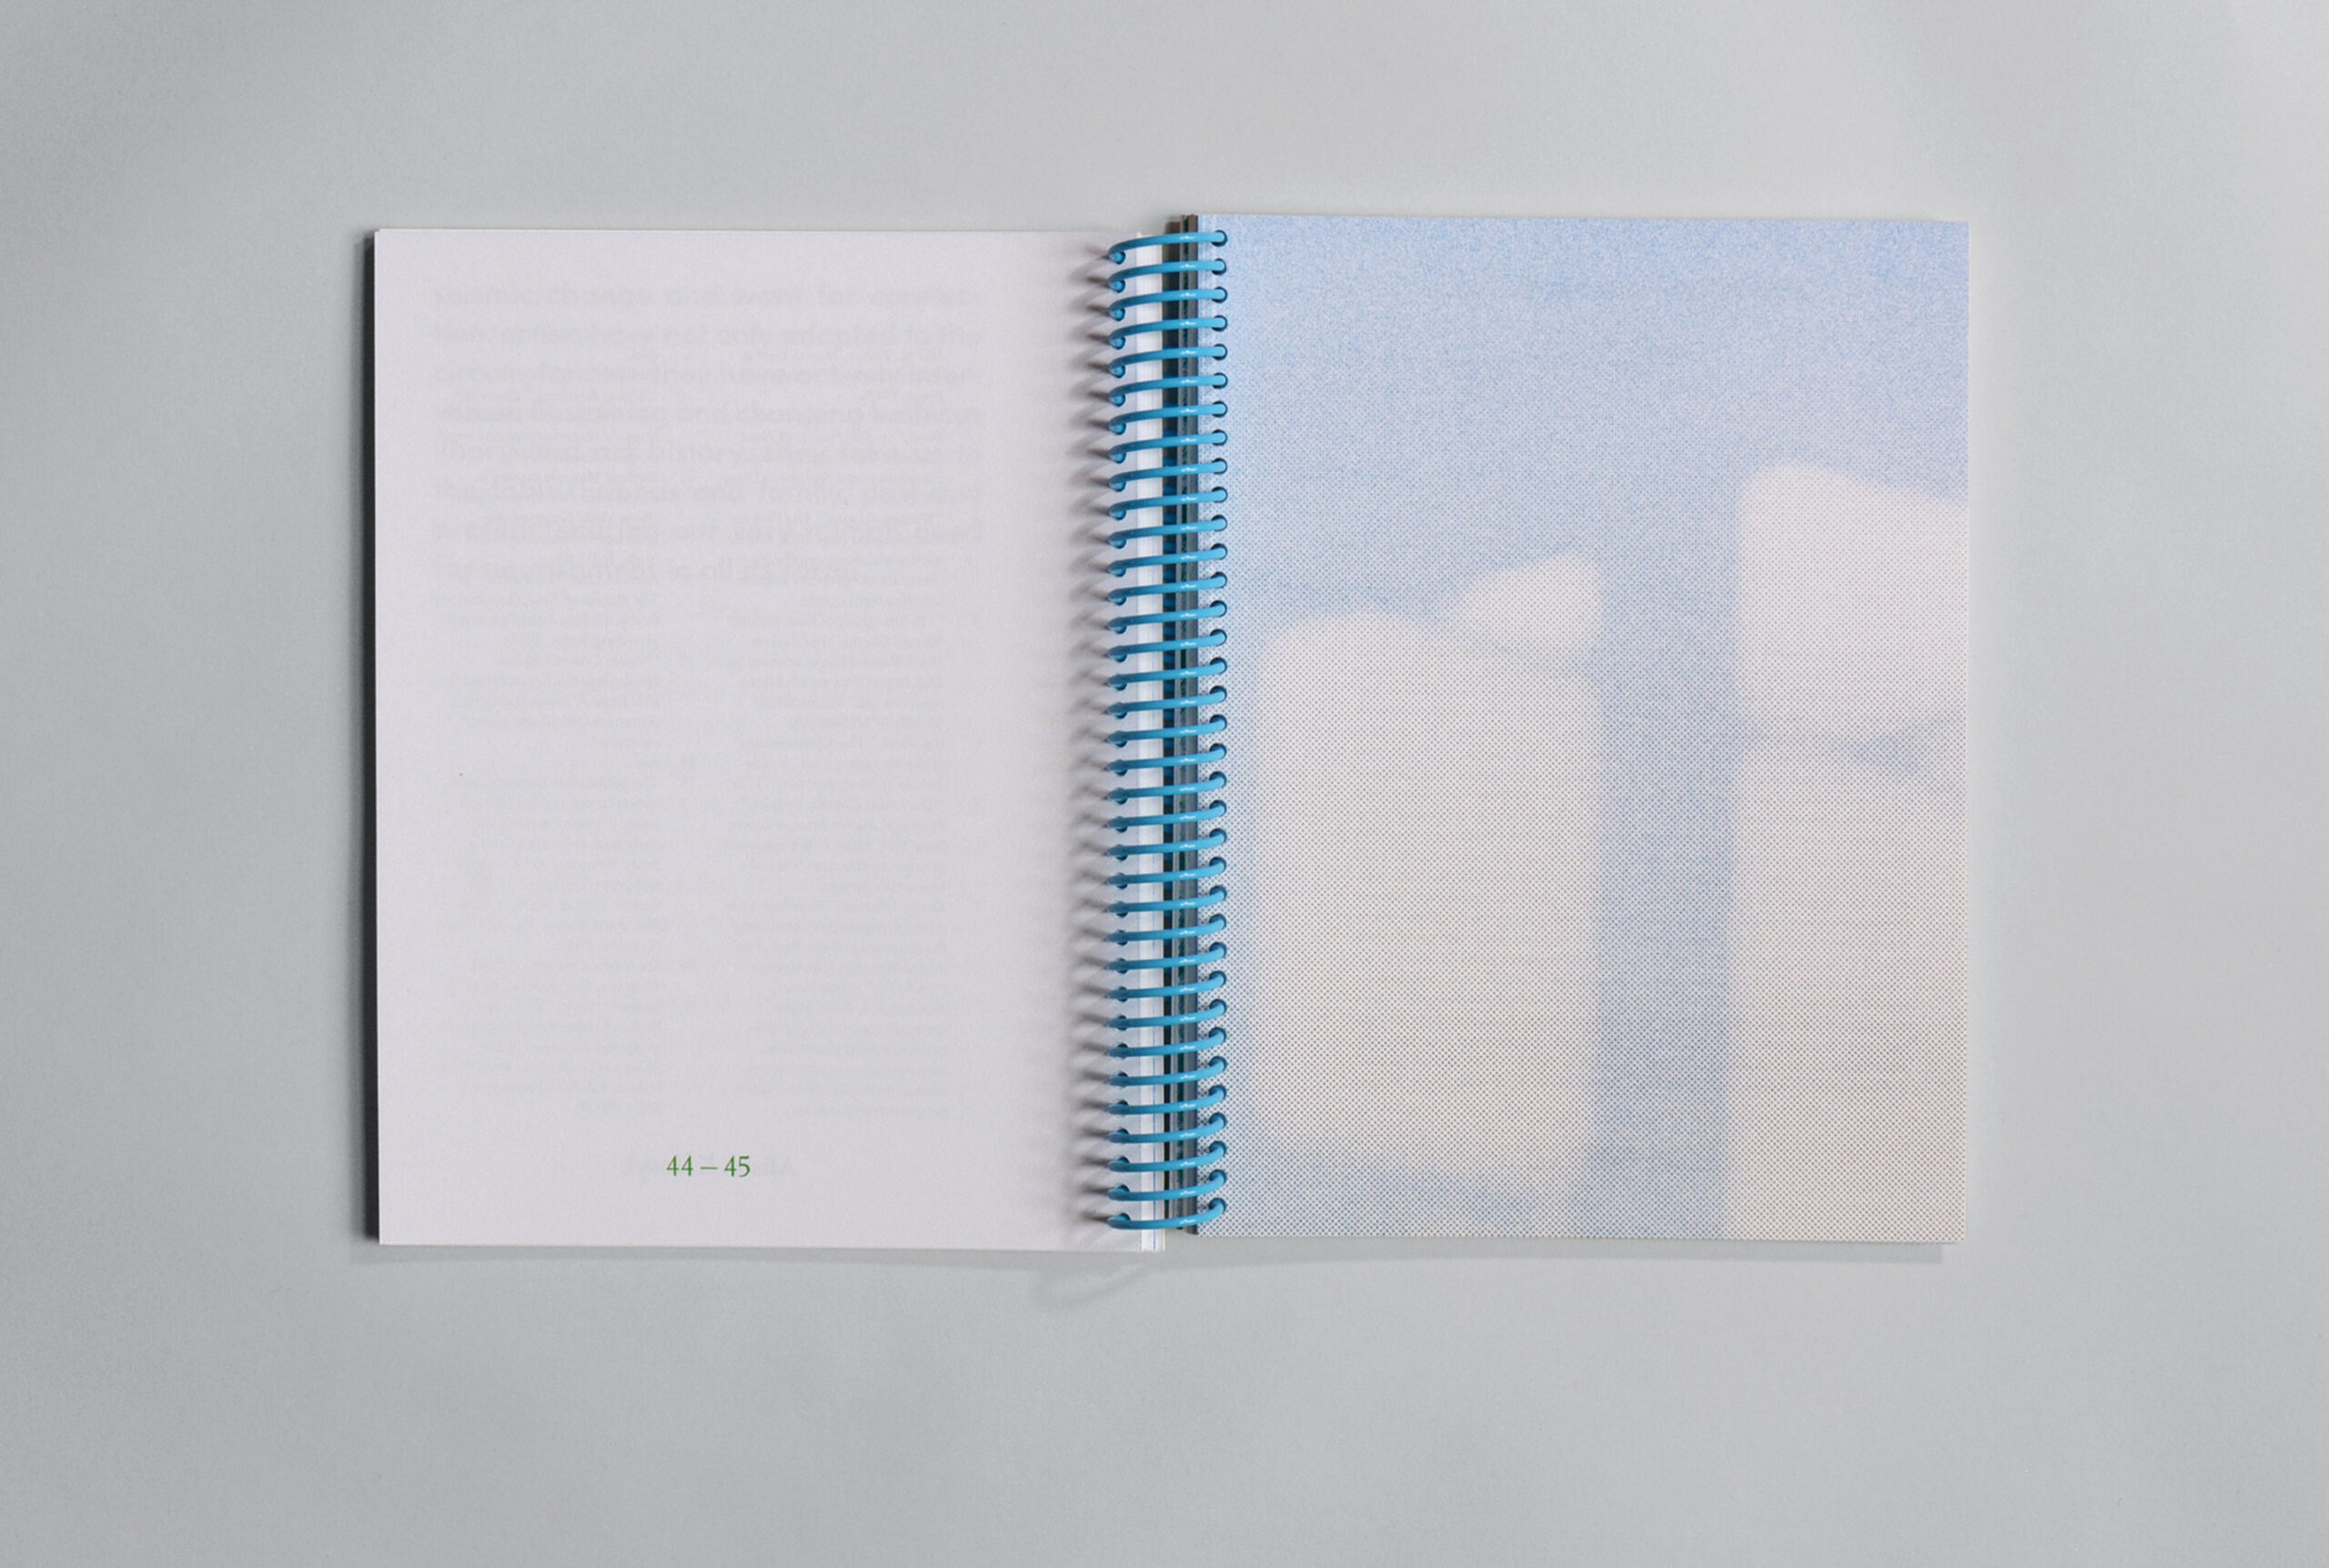 Risograph printed exhibition catalog with light blue image on white paper, bound with a blue spiral coil.